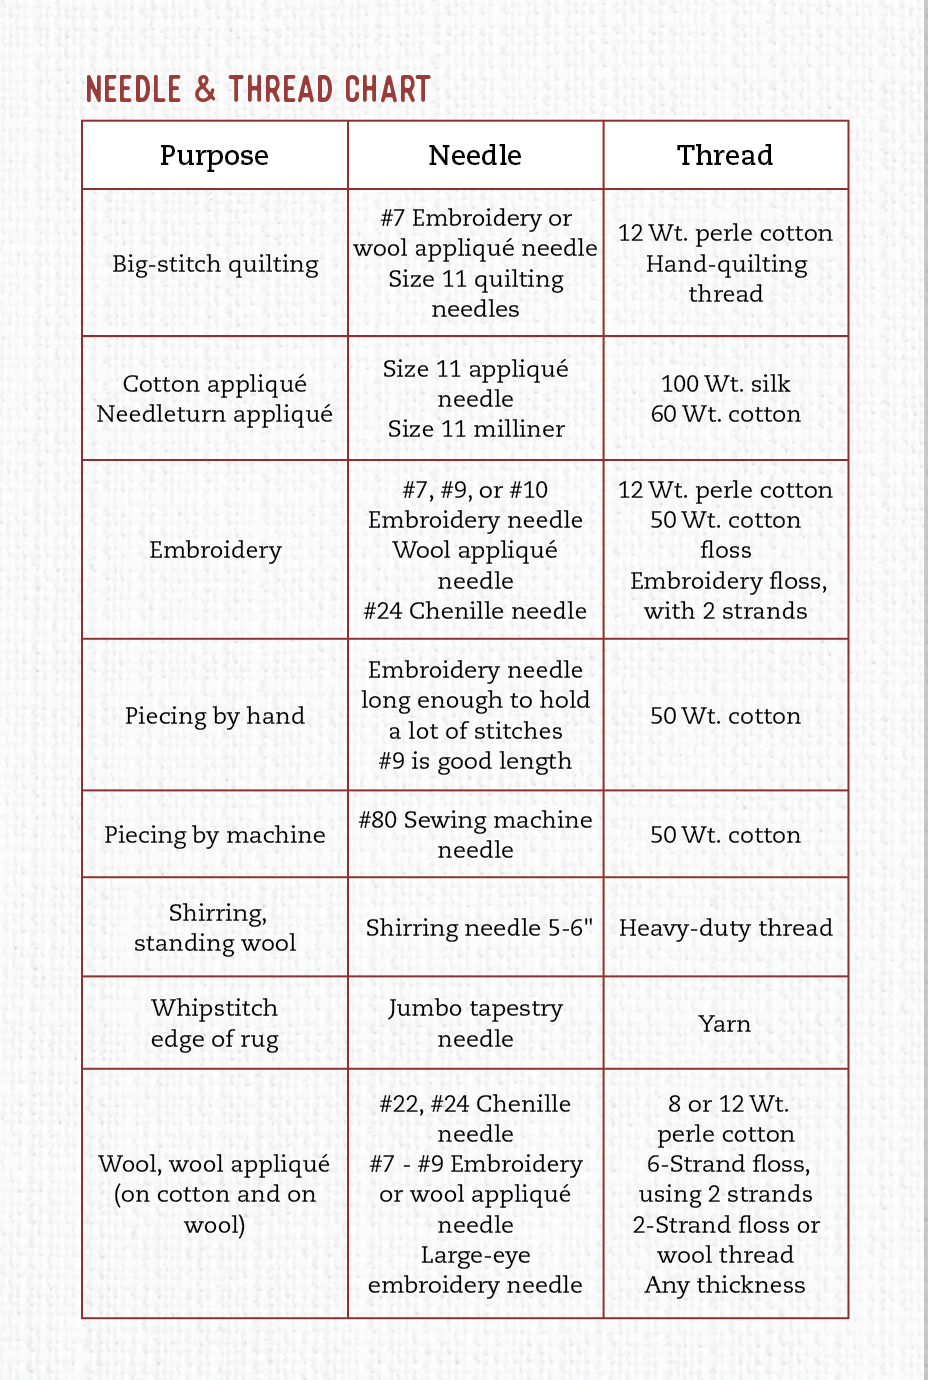 Types of Cotton & How to Sew Them